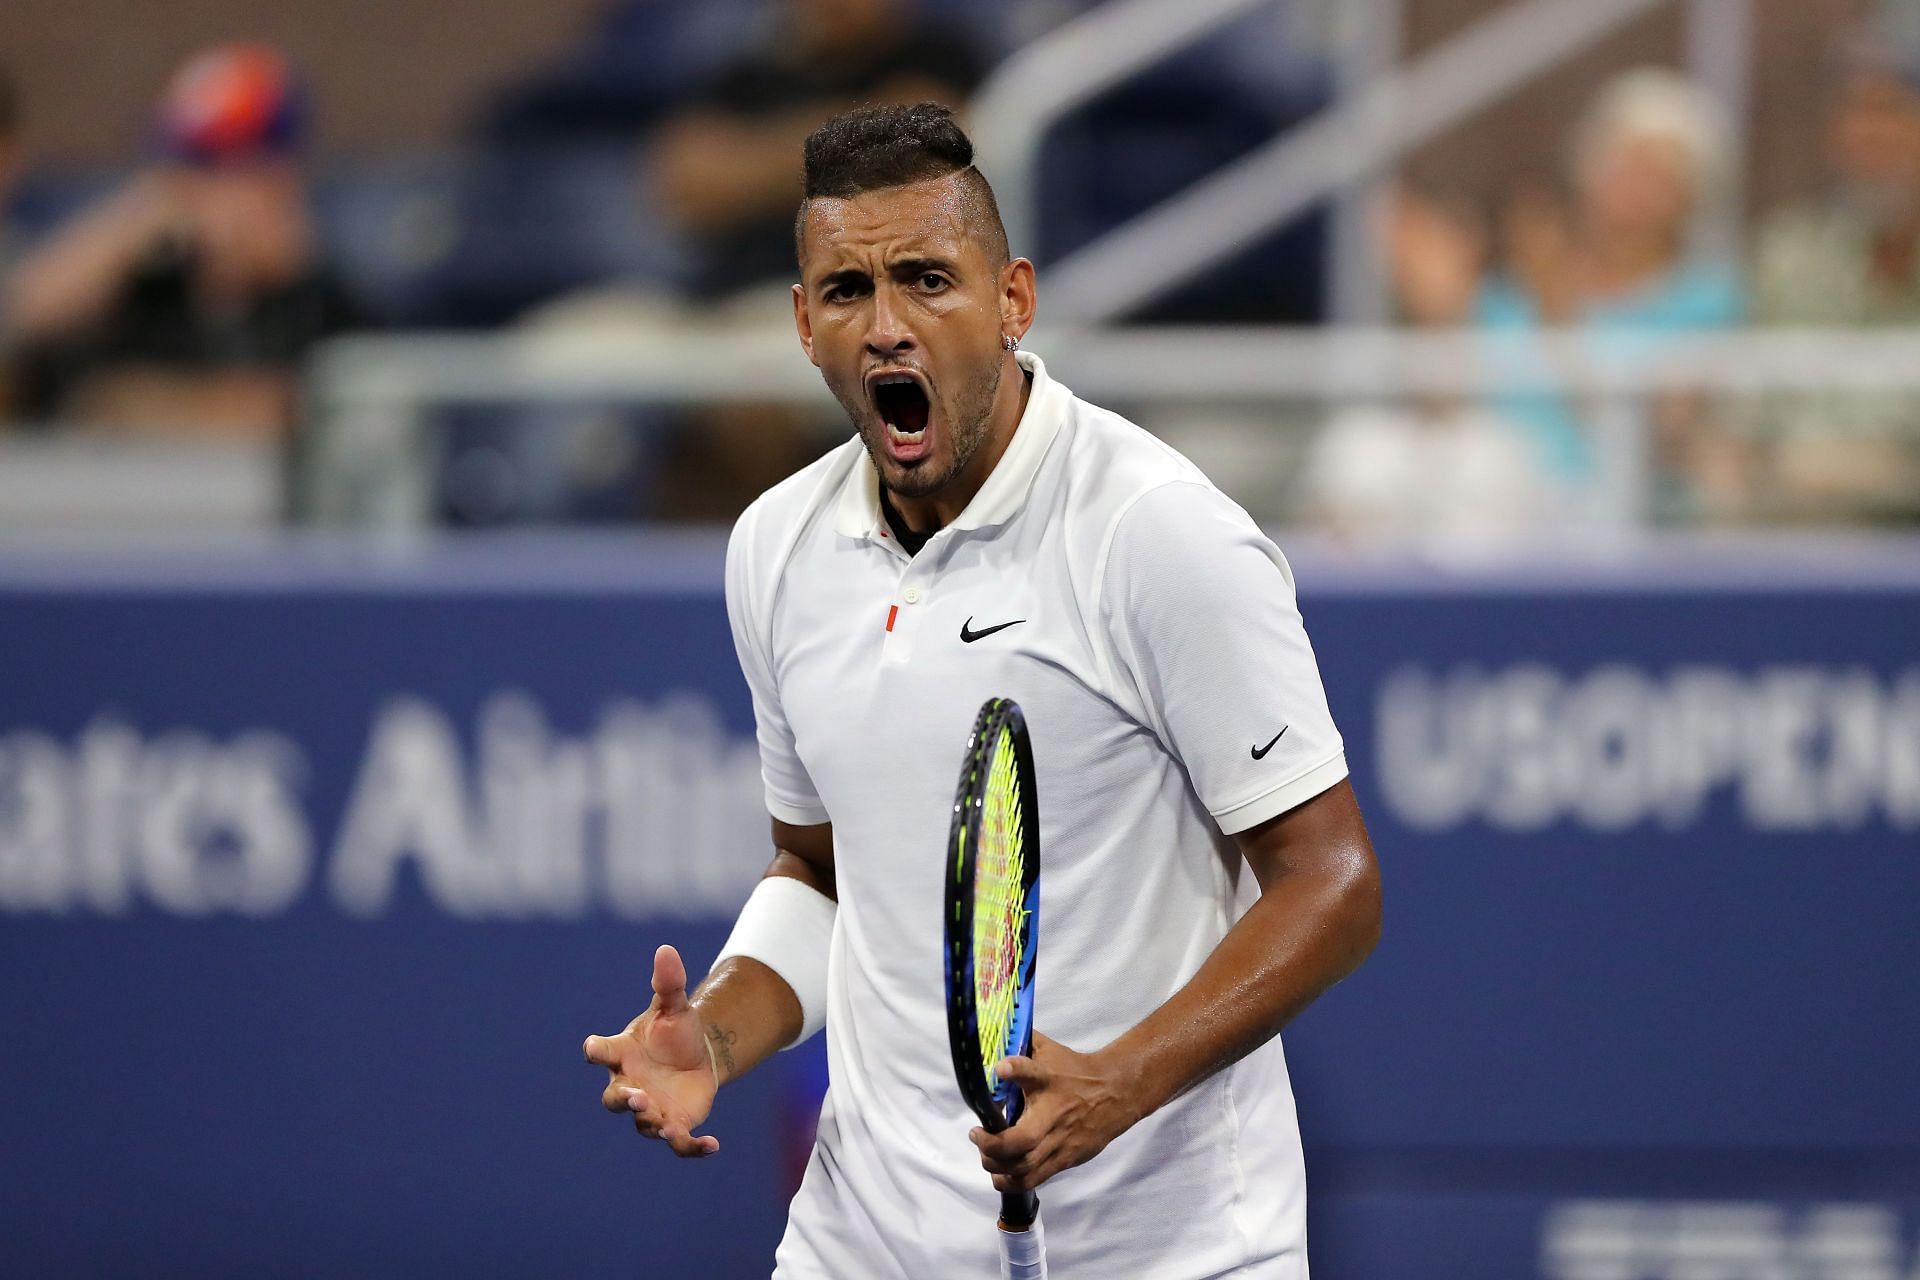 Nick Kyrgios in action at the 2019 US Open